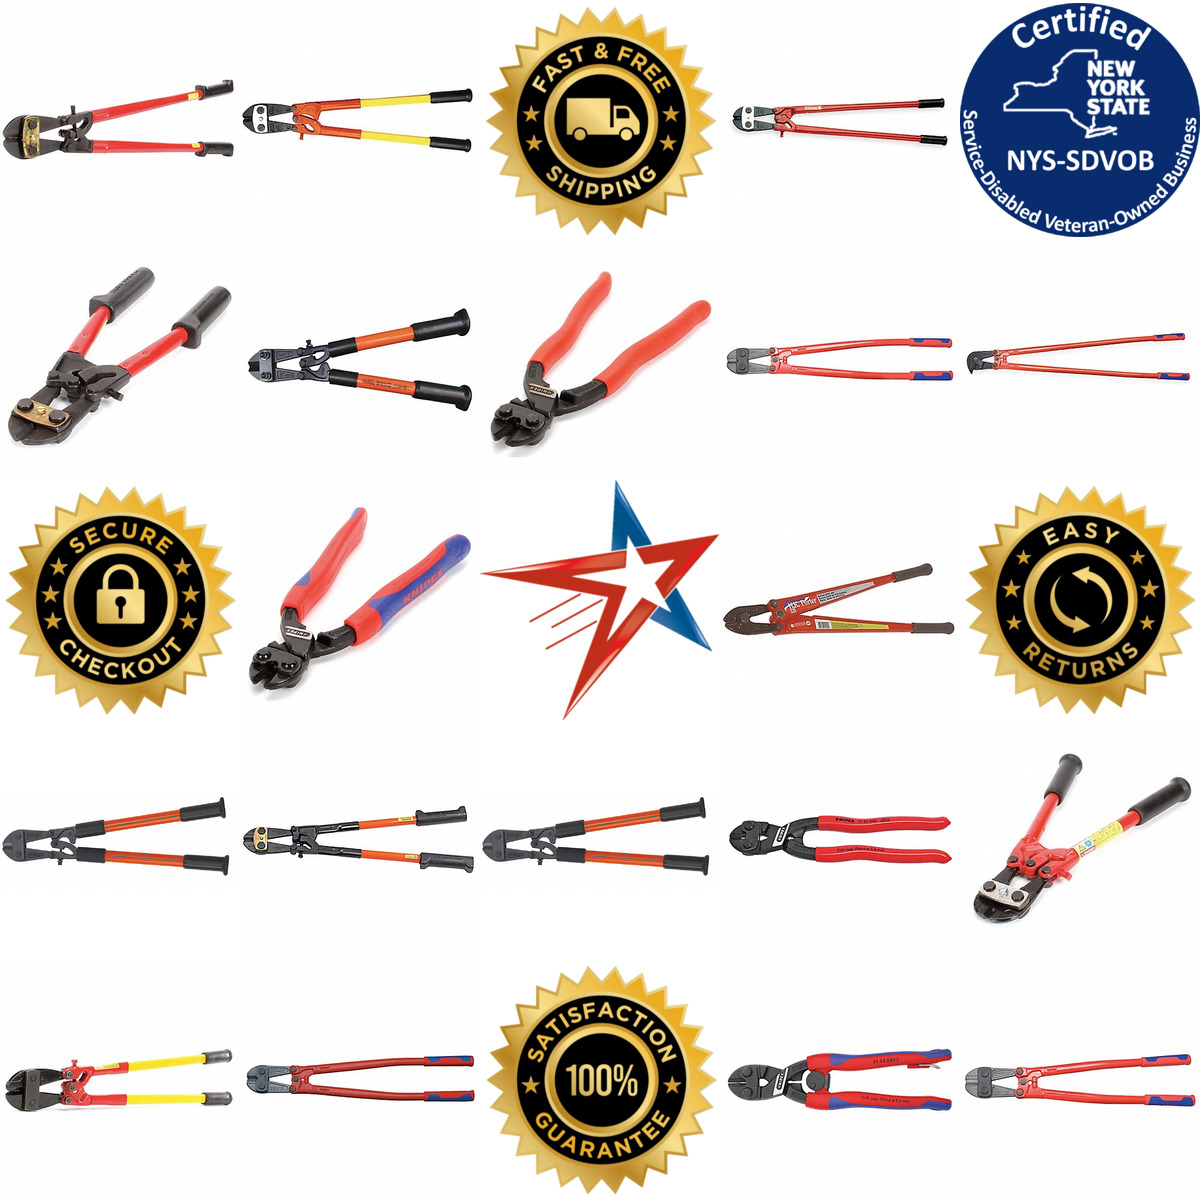 A selection of Bolt Cutters products on GoVets